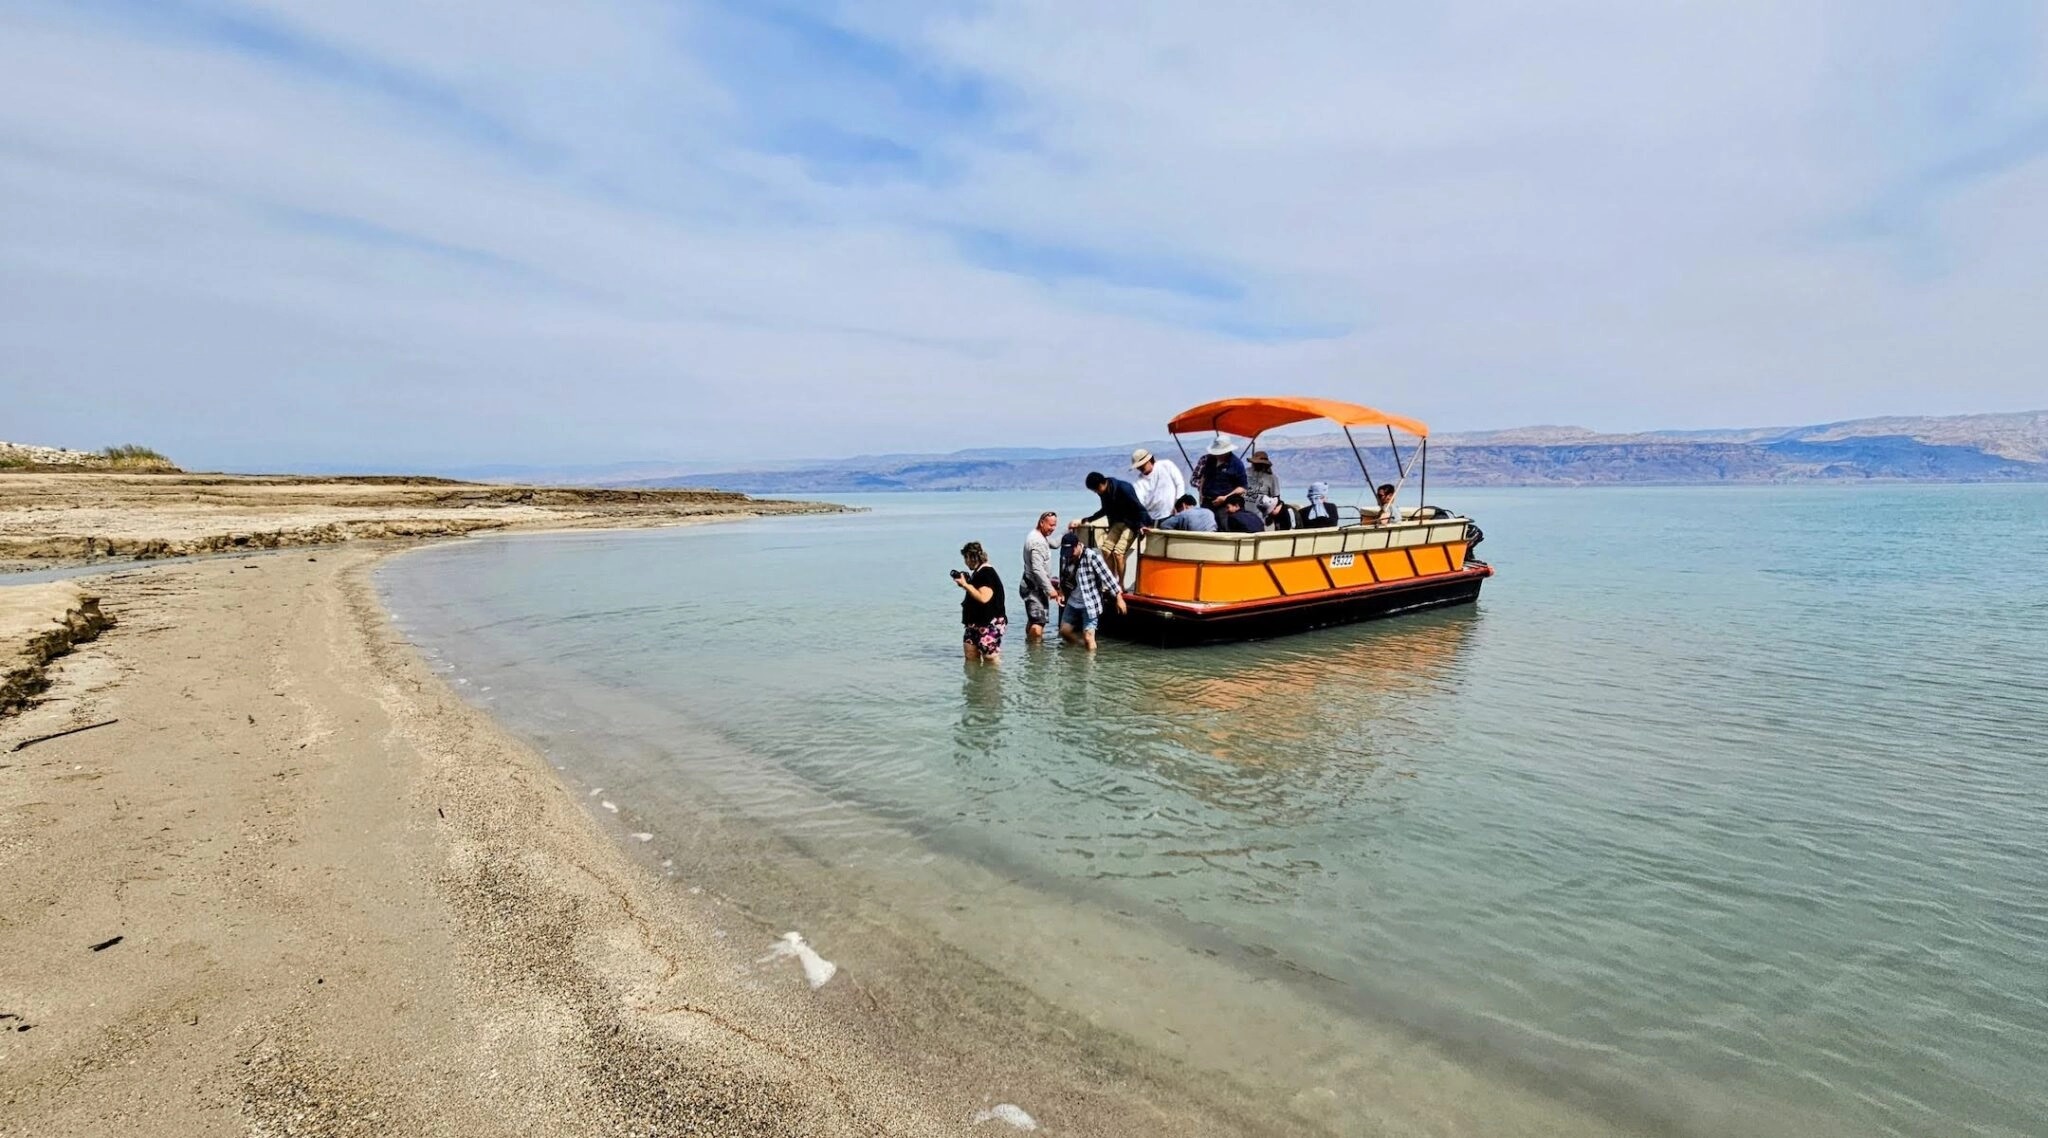 Boat trip aimed at saving Dead Sea also explores marvels revealed